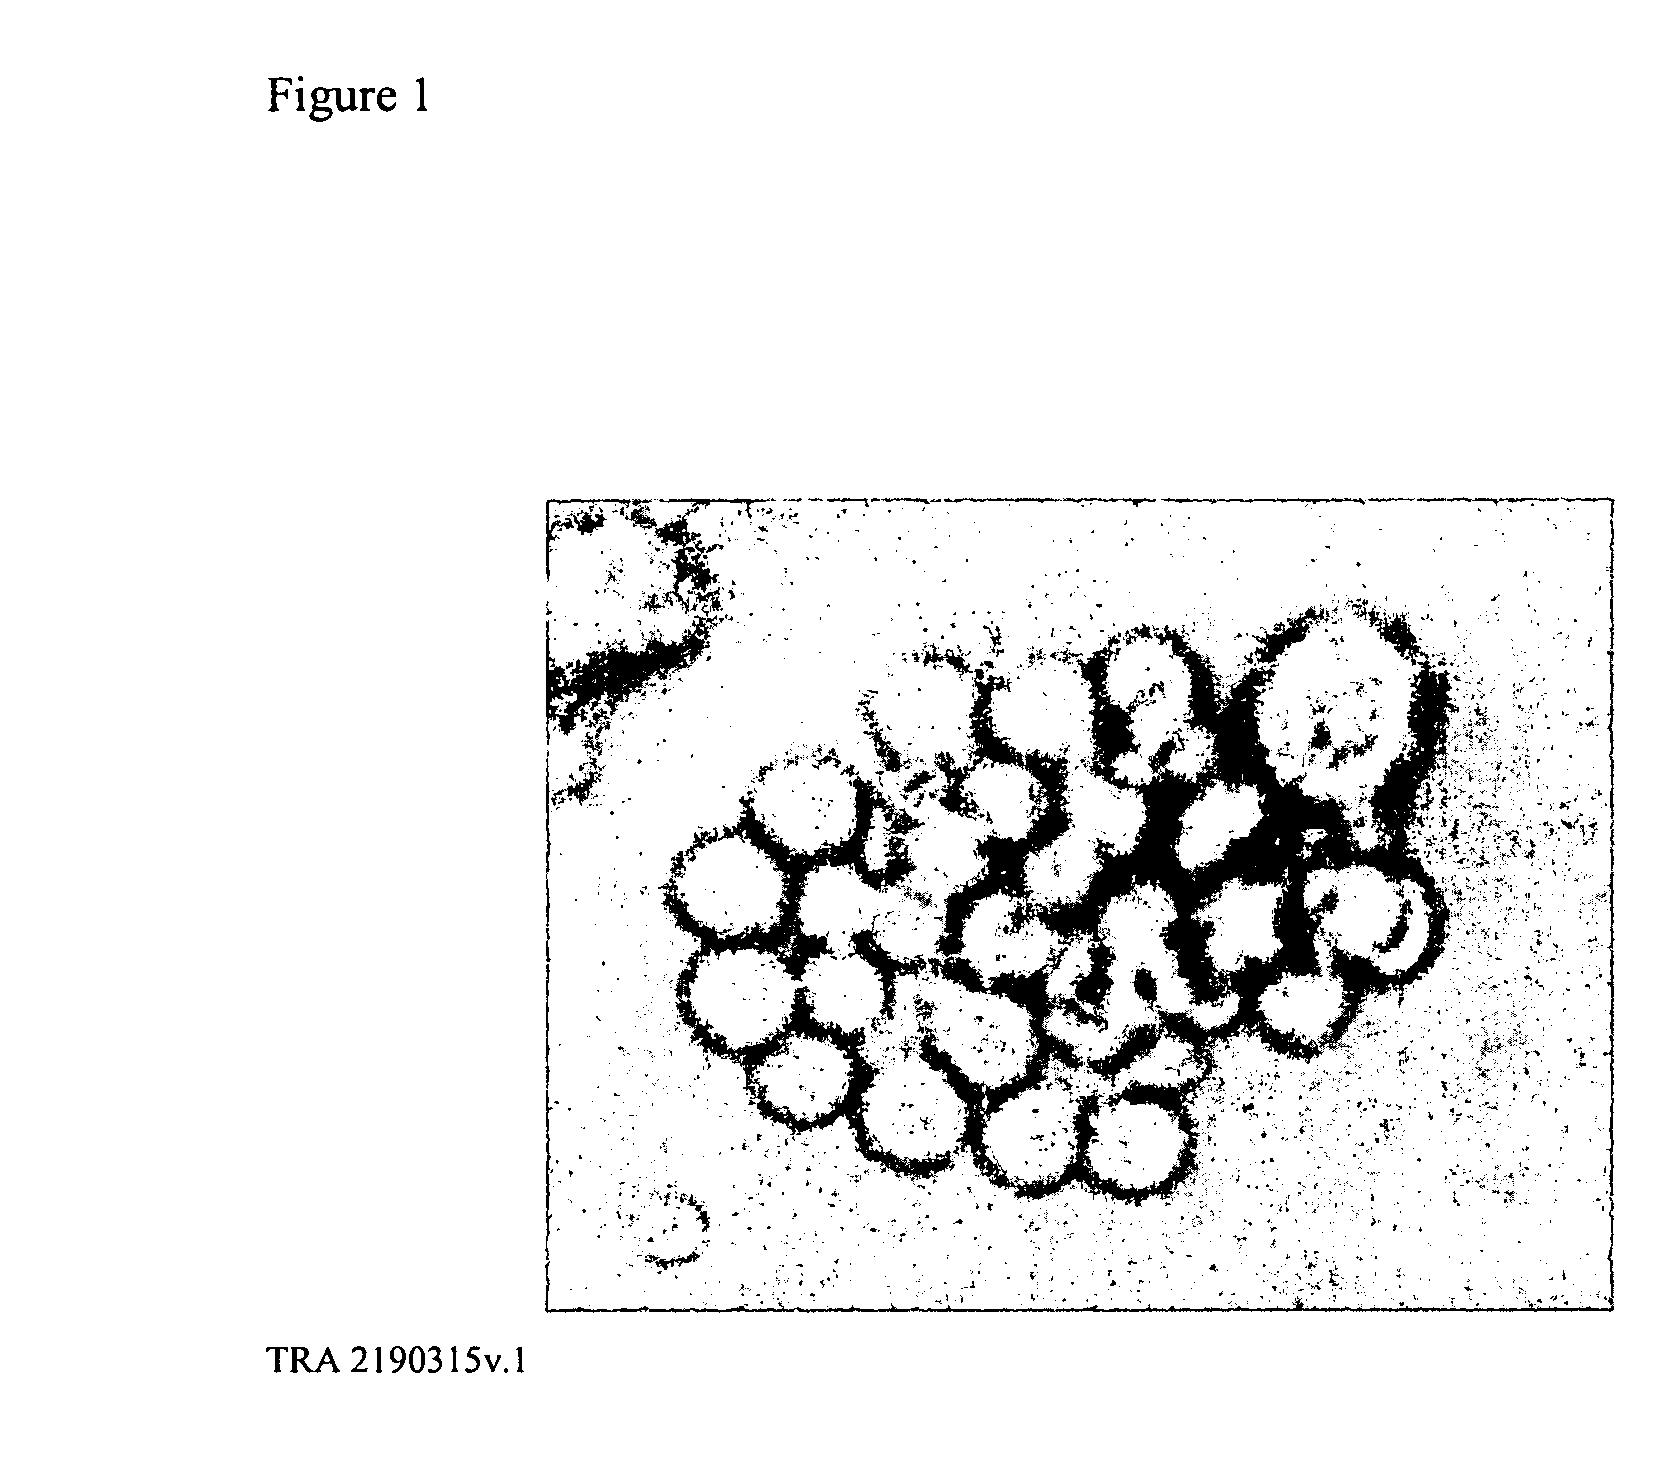 Methods of producing stable B-lymphocytes